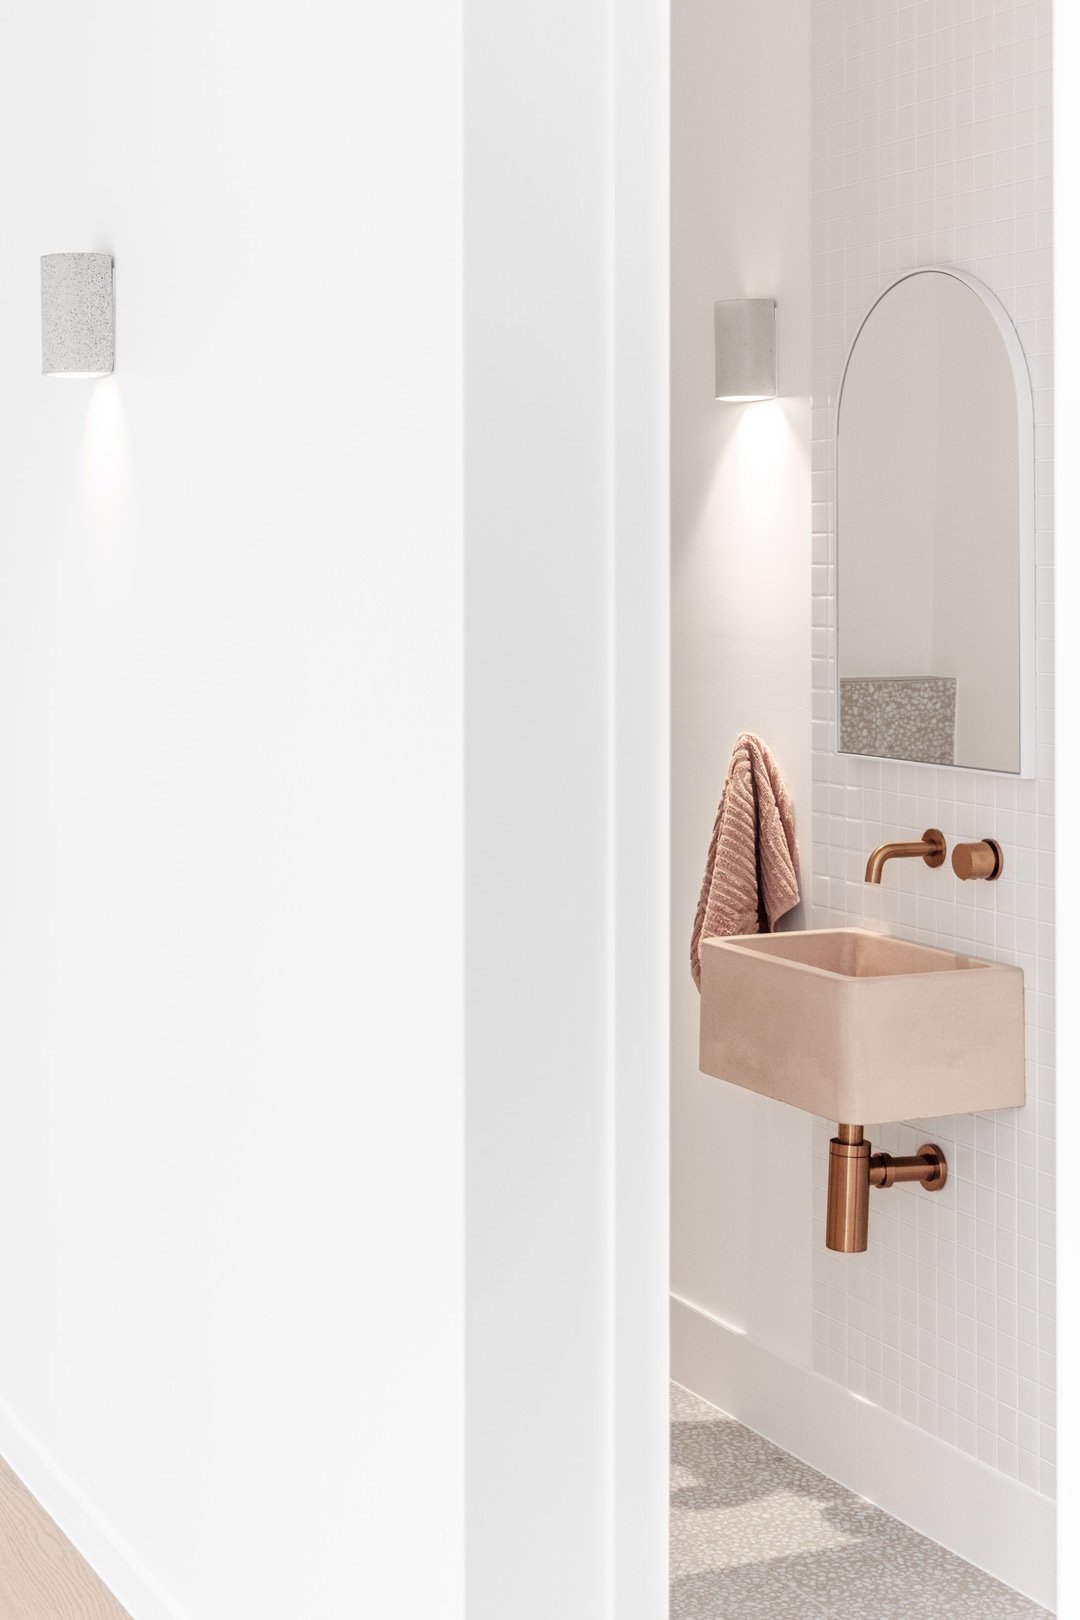 Add new light fixtures to your space for a budget update for your bathroom renovation